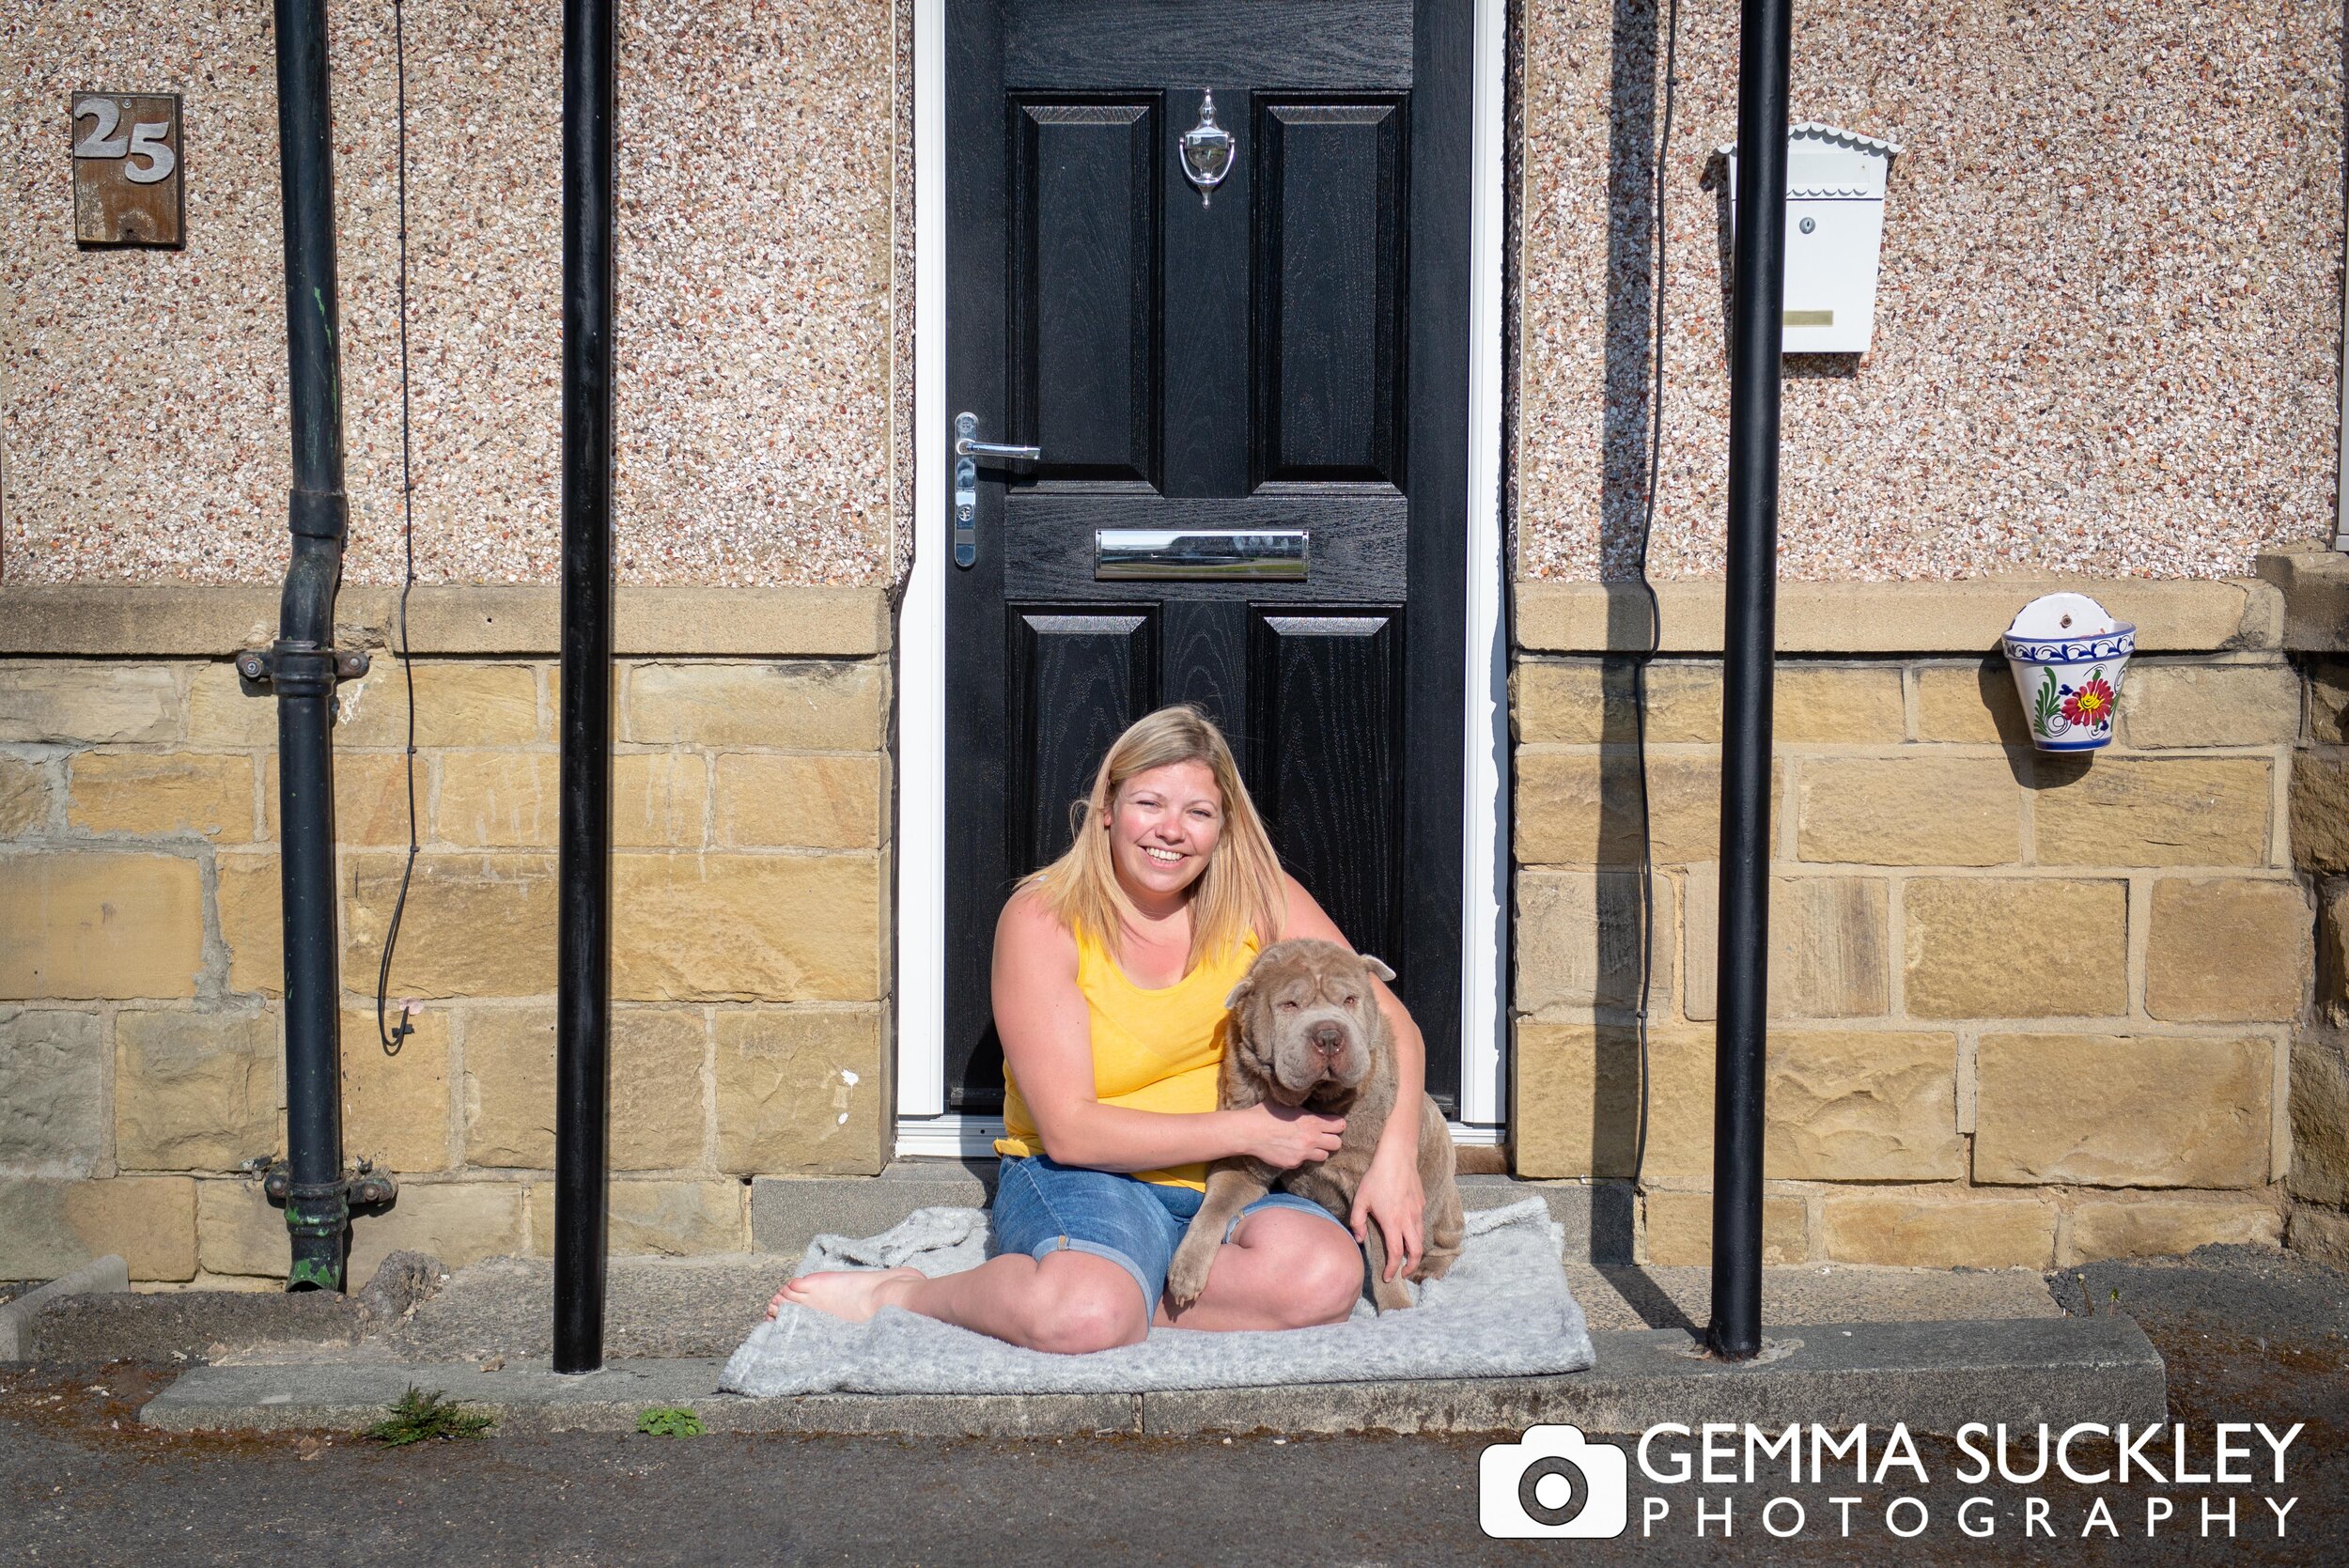 a gilf sitting on her doorstep with her dog